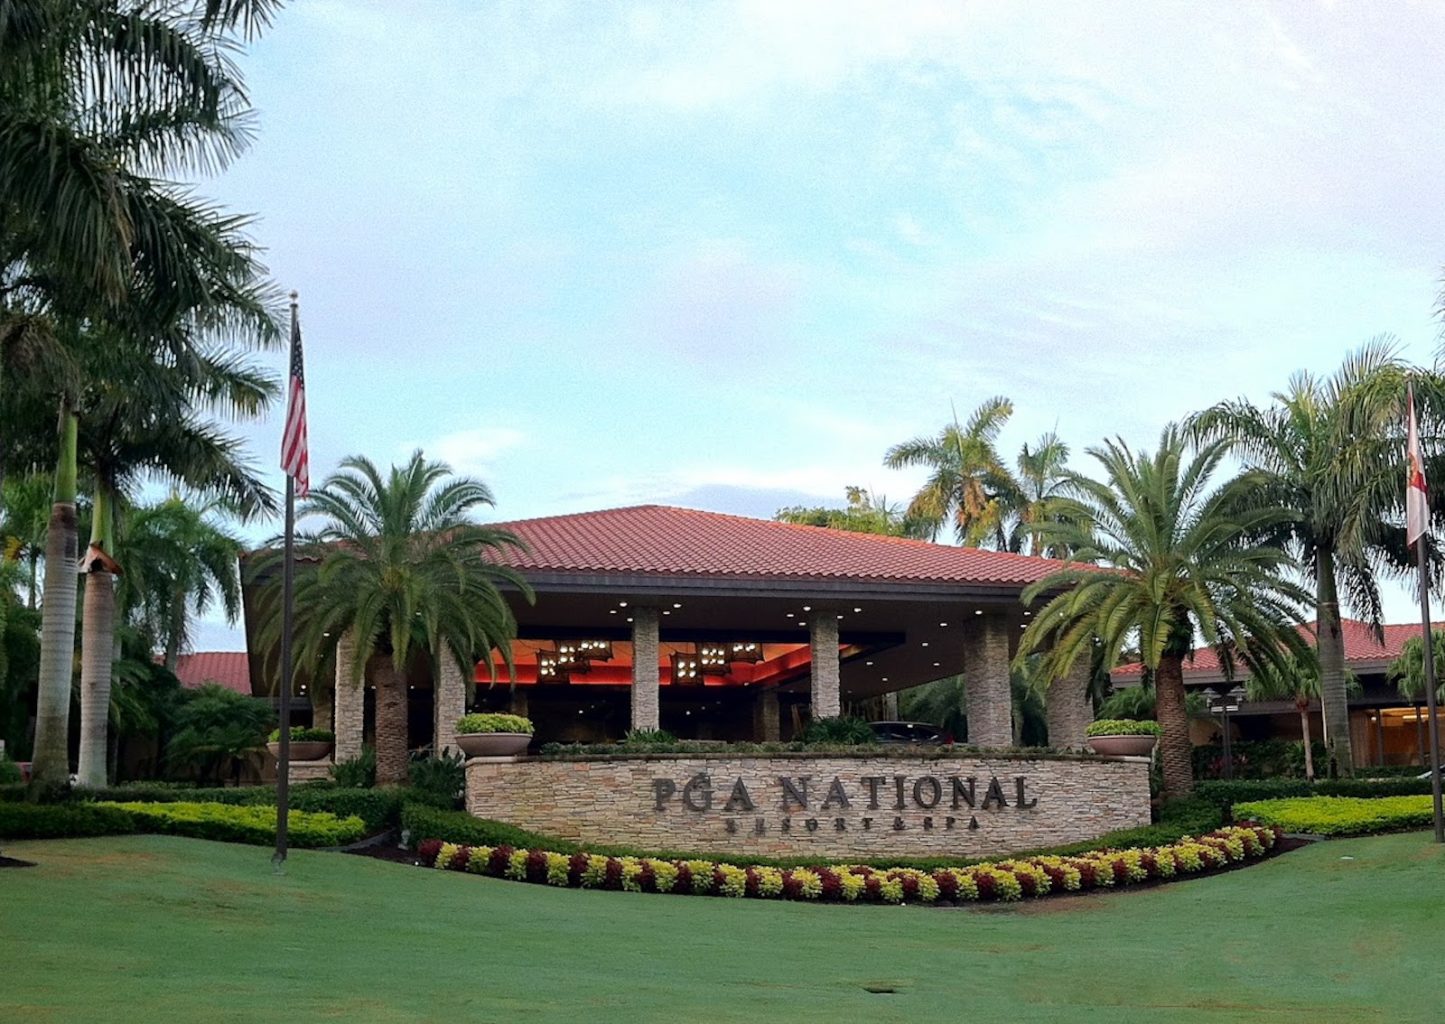 PGA National , golf in flordia